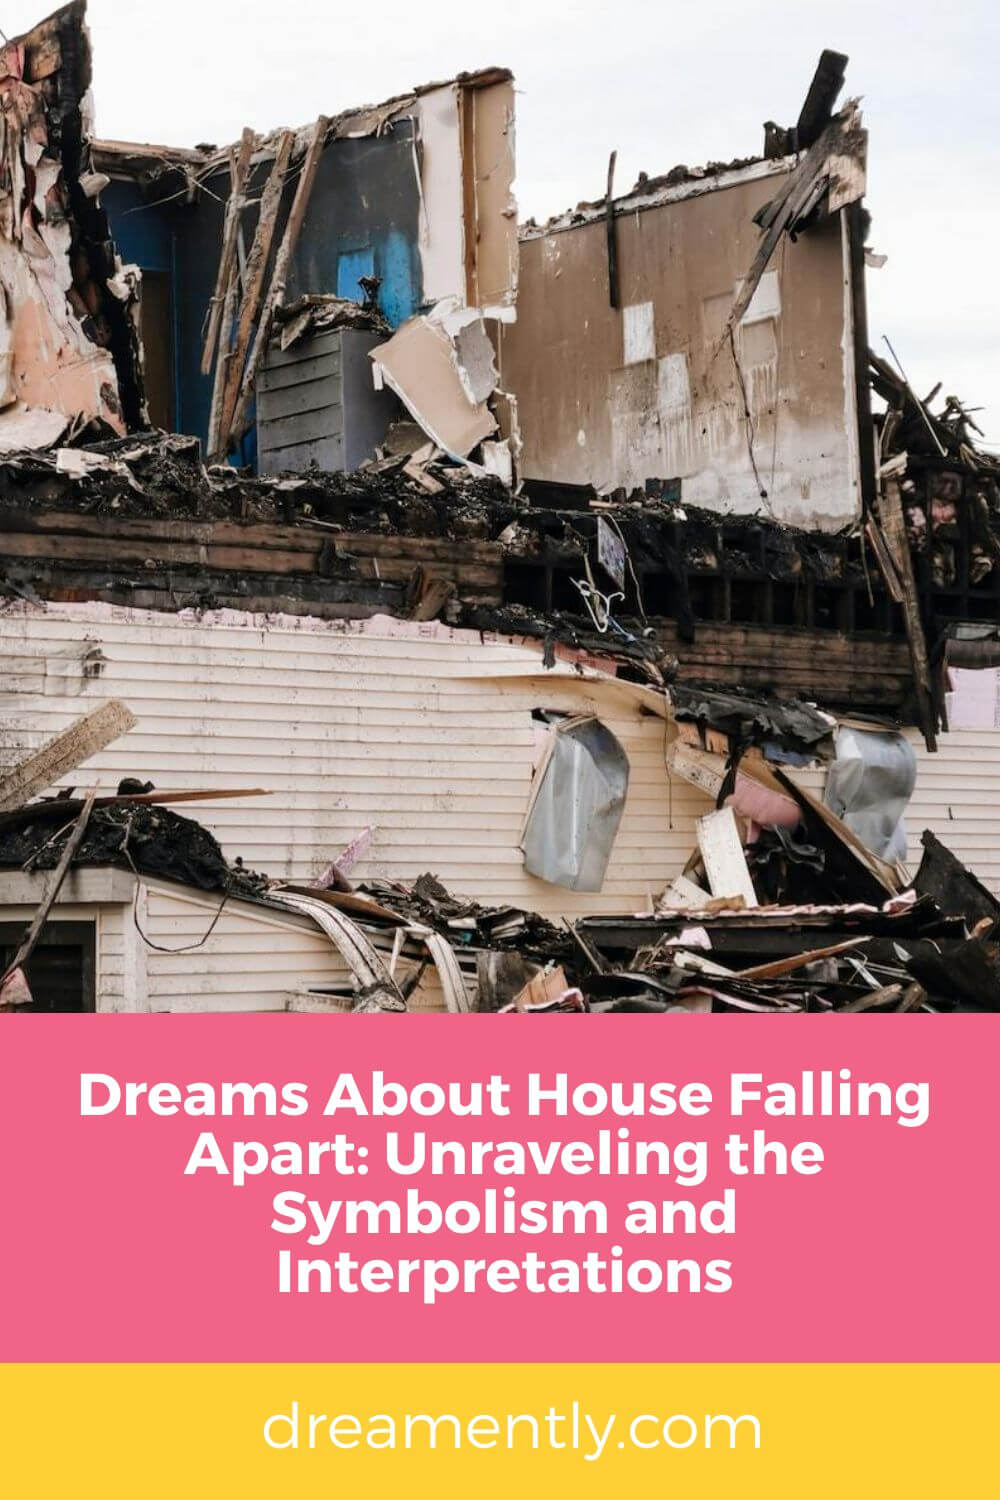 Dreams About House Falling Apart- Unraveling the Symbolism and Interpretations (2)